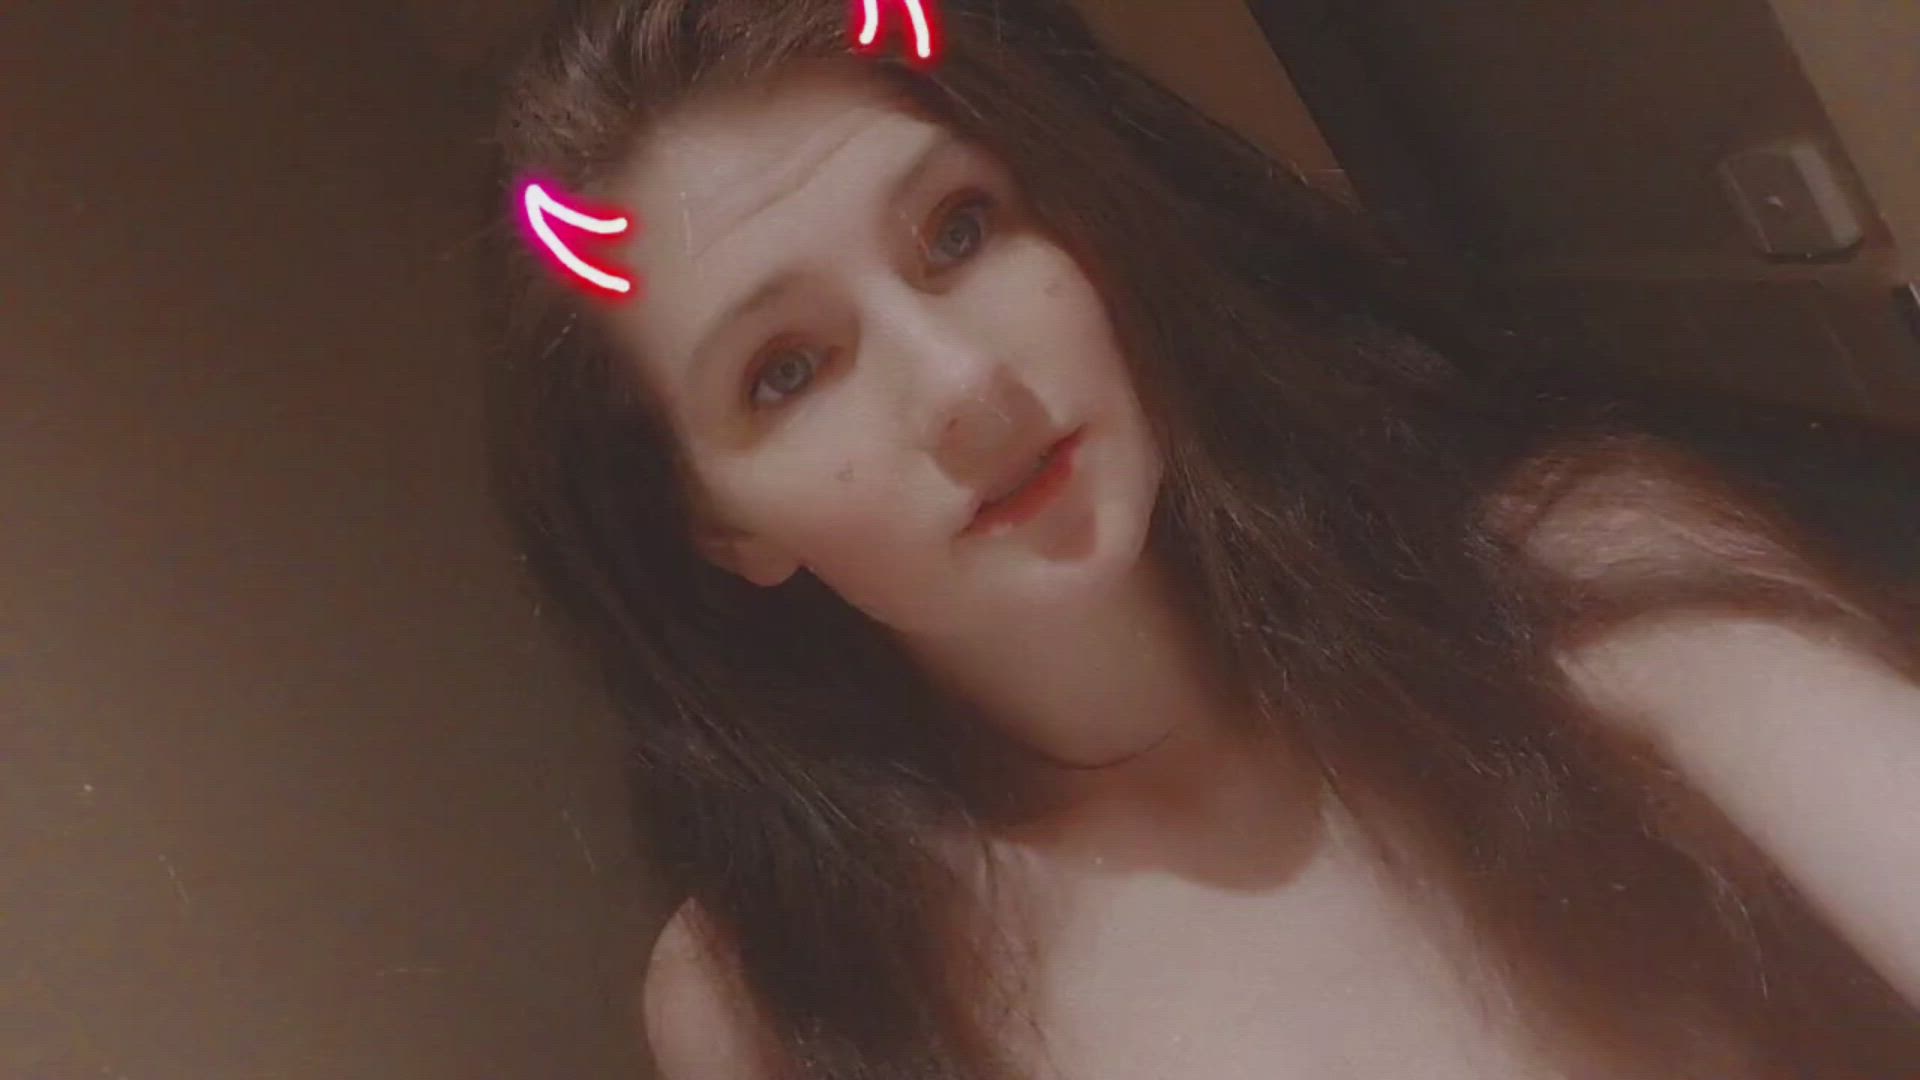 Amateur porn video with onlyfans model Laurs-x <strong>@laurs.x</strong>